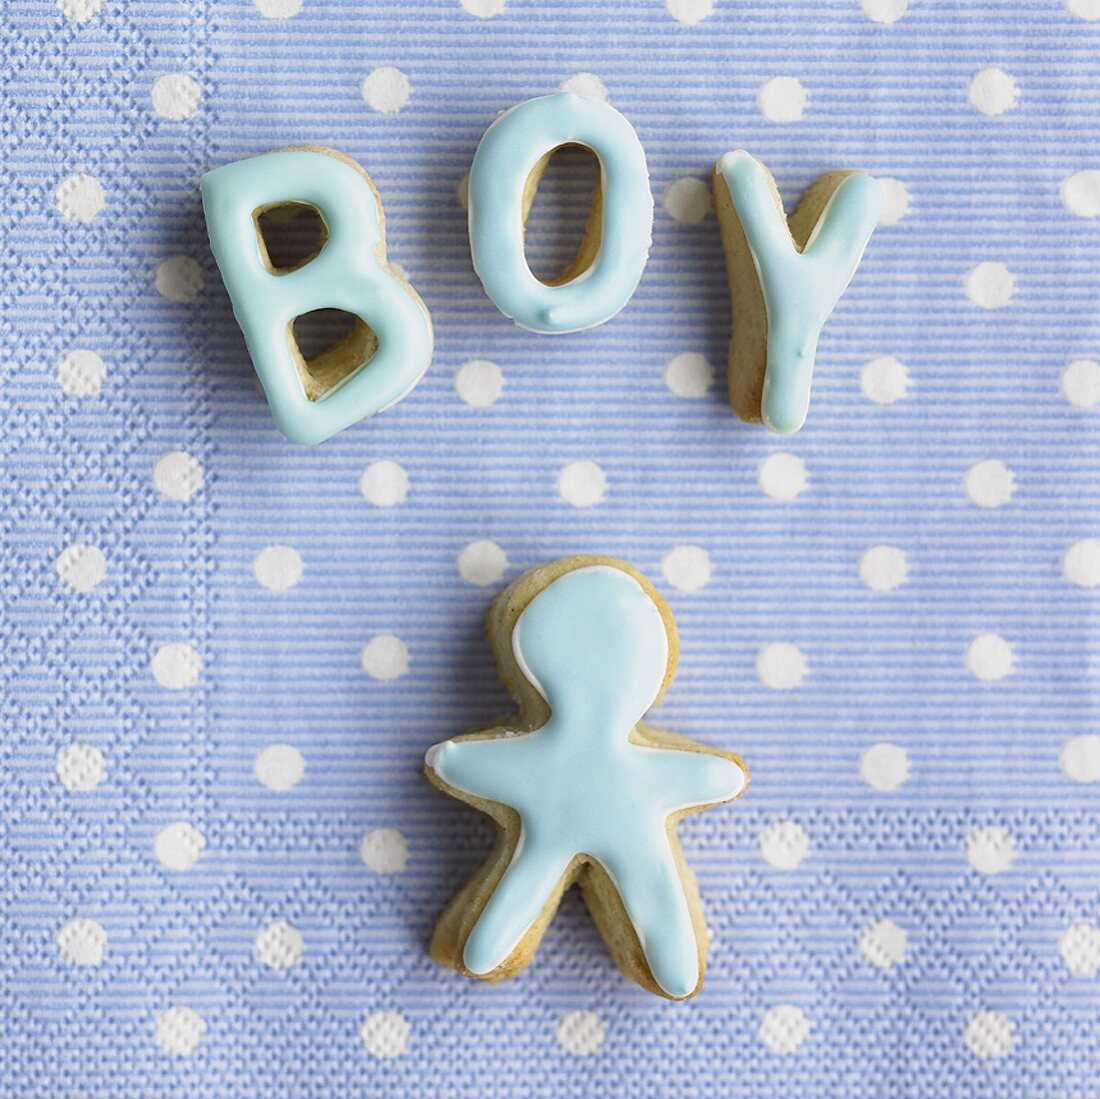 Baked letters spelling 'Boy' and baked figure on a napkin